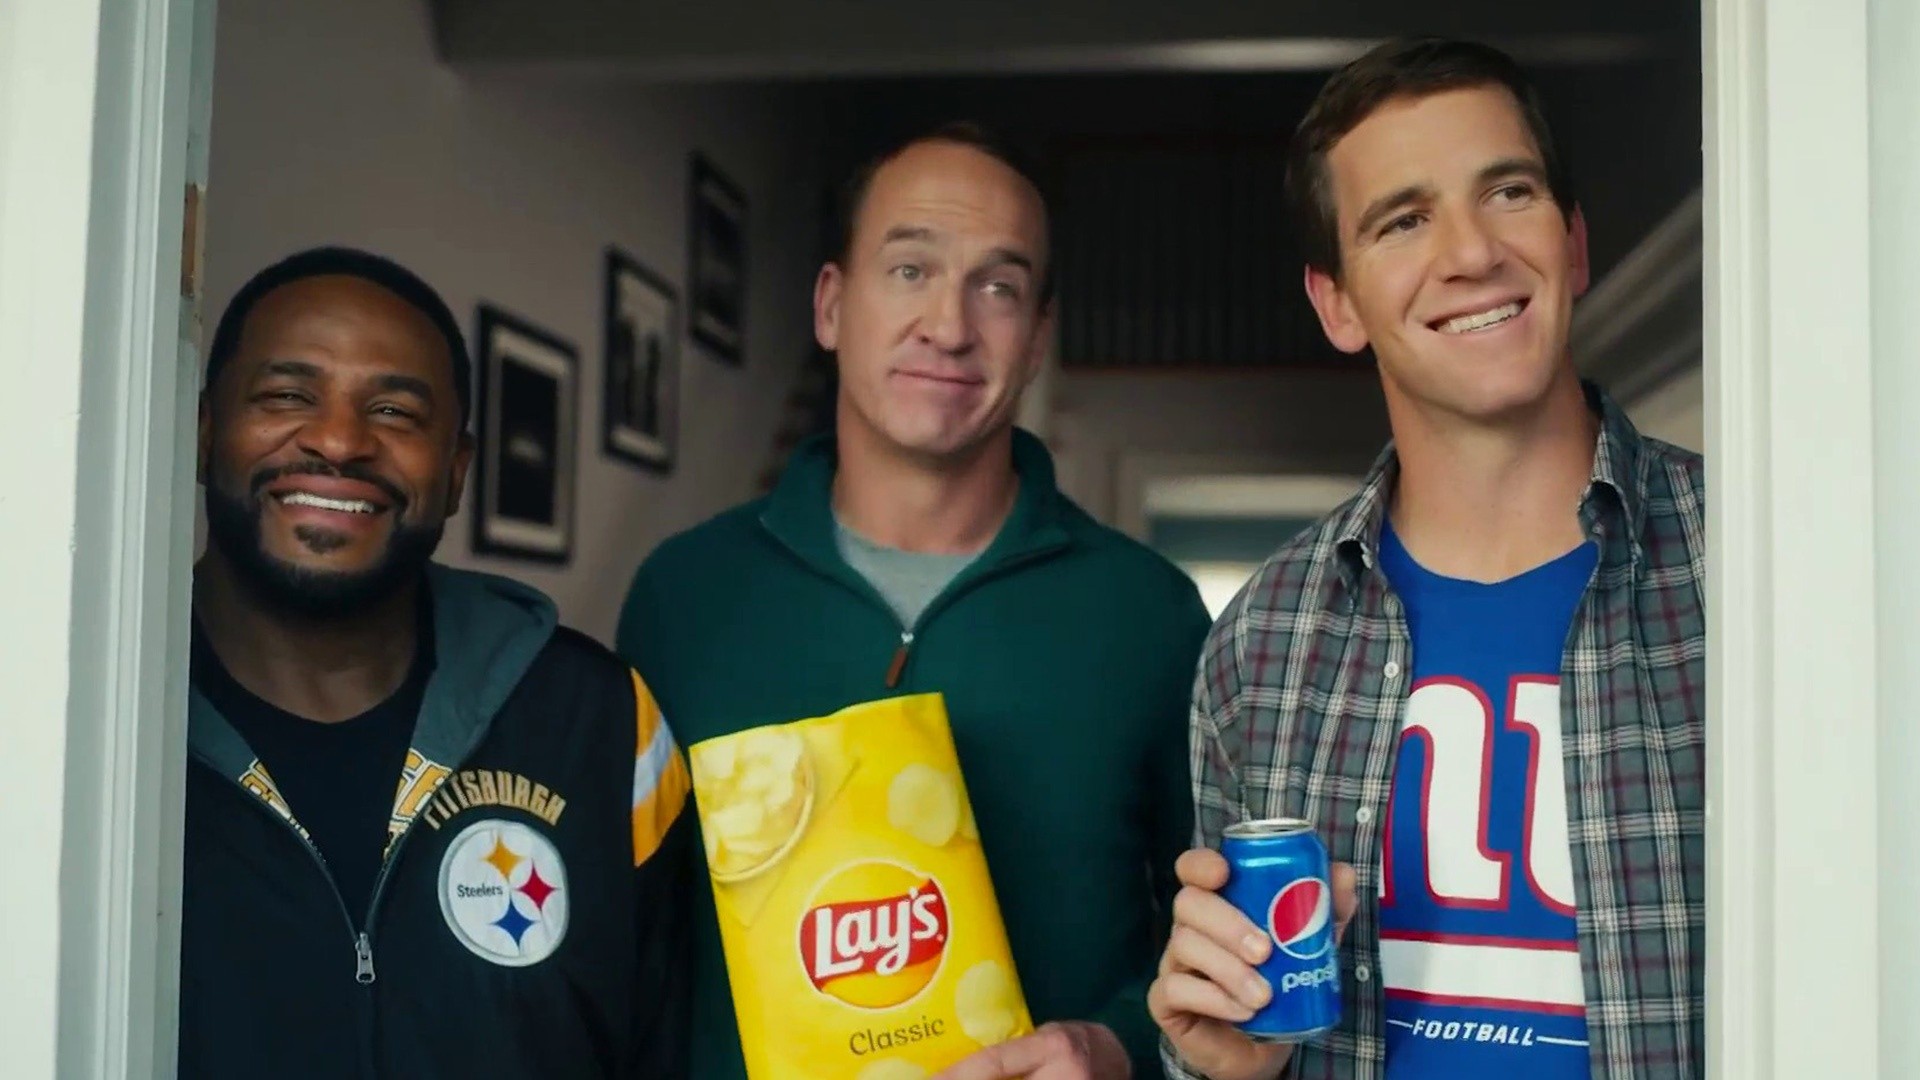 Get 1st look at star-studded NFL playoff ad